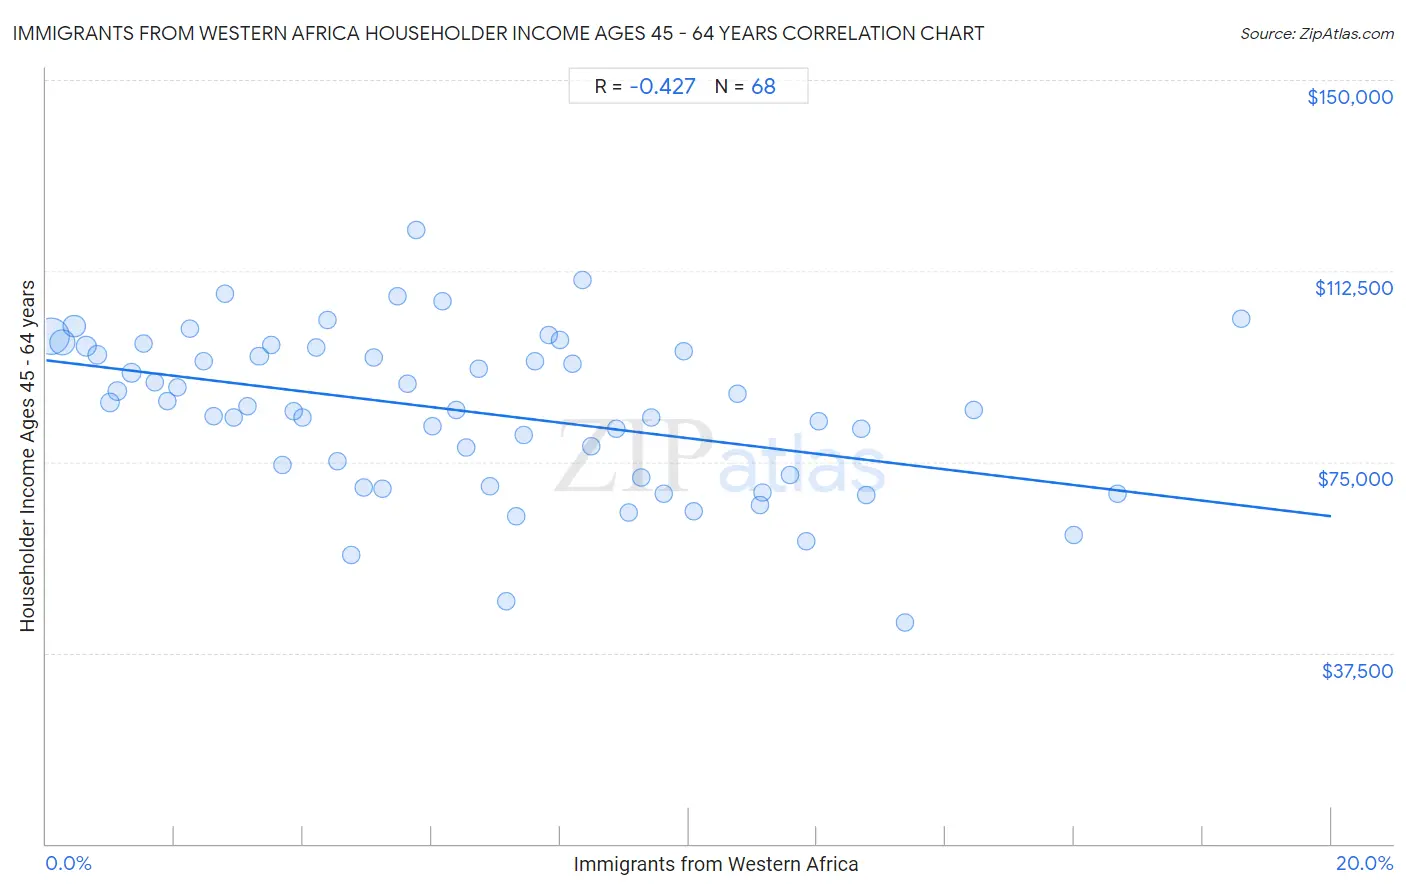 Immigrants from Western Africa Householder Income Ages 45 - 64 years